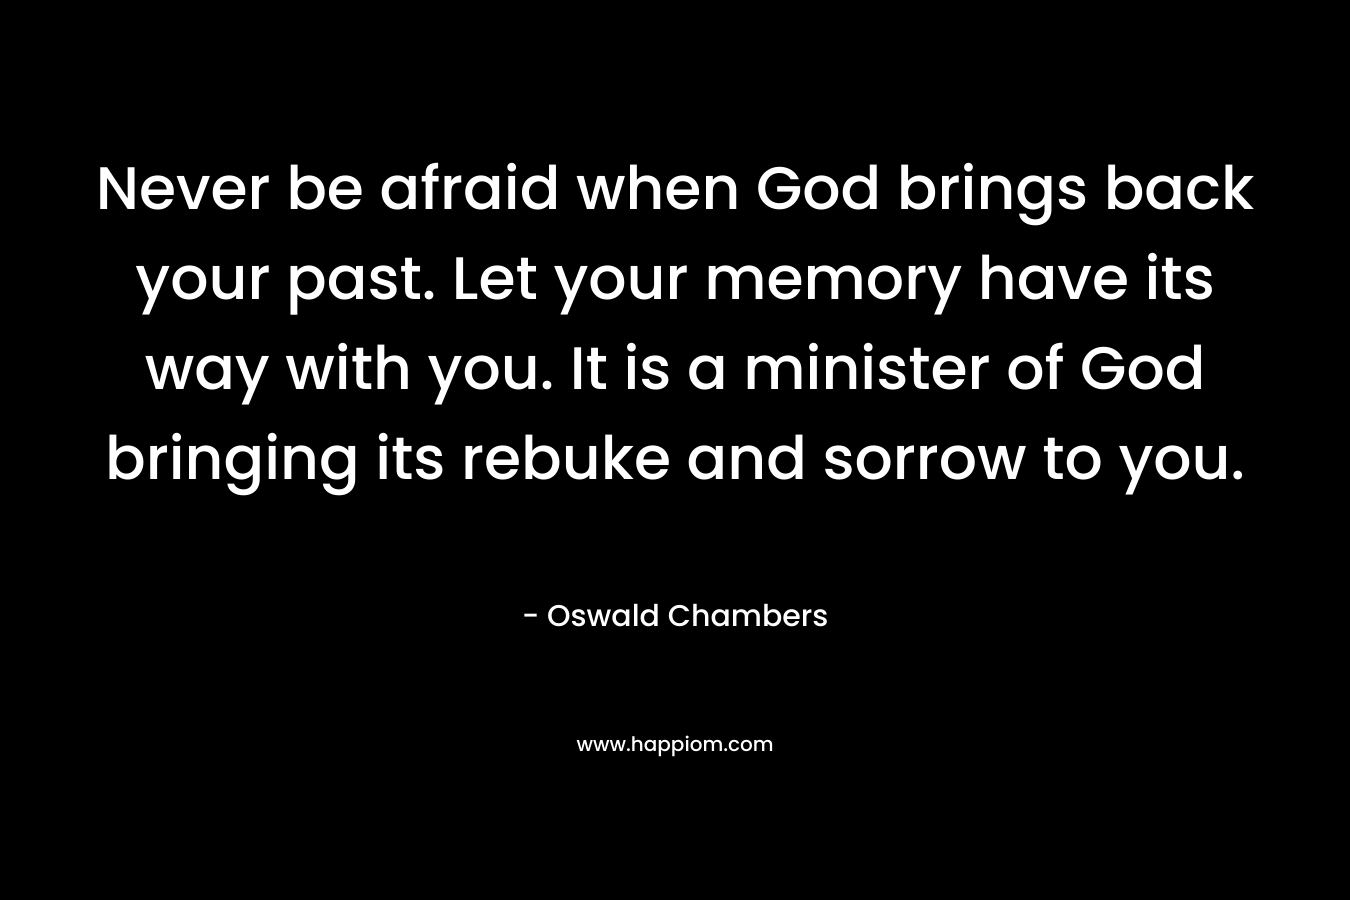 Never be afraid when God brings back your past. Let your memory have its way with you. It is a minister of God bringing its rebuke and sorrow to you. – Oswald Chambers